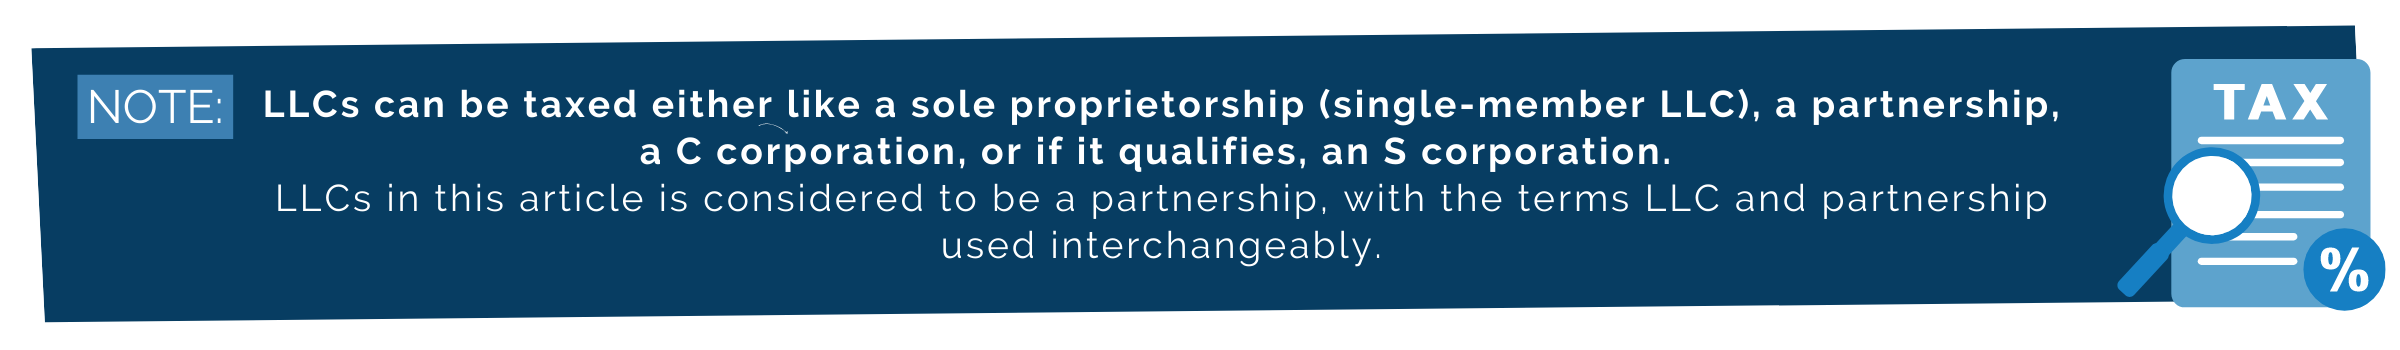 NOTE: LLCs can be taxed either like a sole proprietorship (single-member LLC), a partnership, a C corporation, or if it qualifies, an S corporation. LLCs in this article is considered to be a partnership, with the terms LLC and partnership used interchangeably.